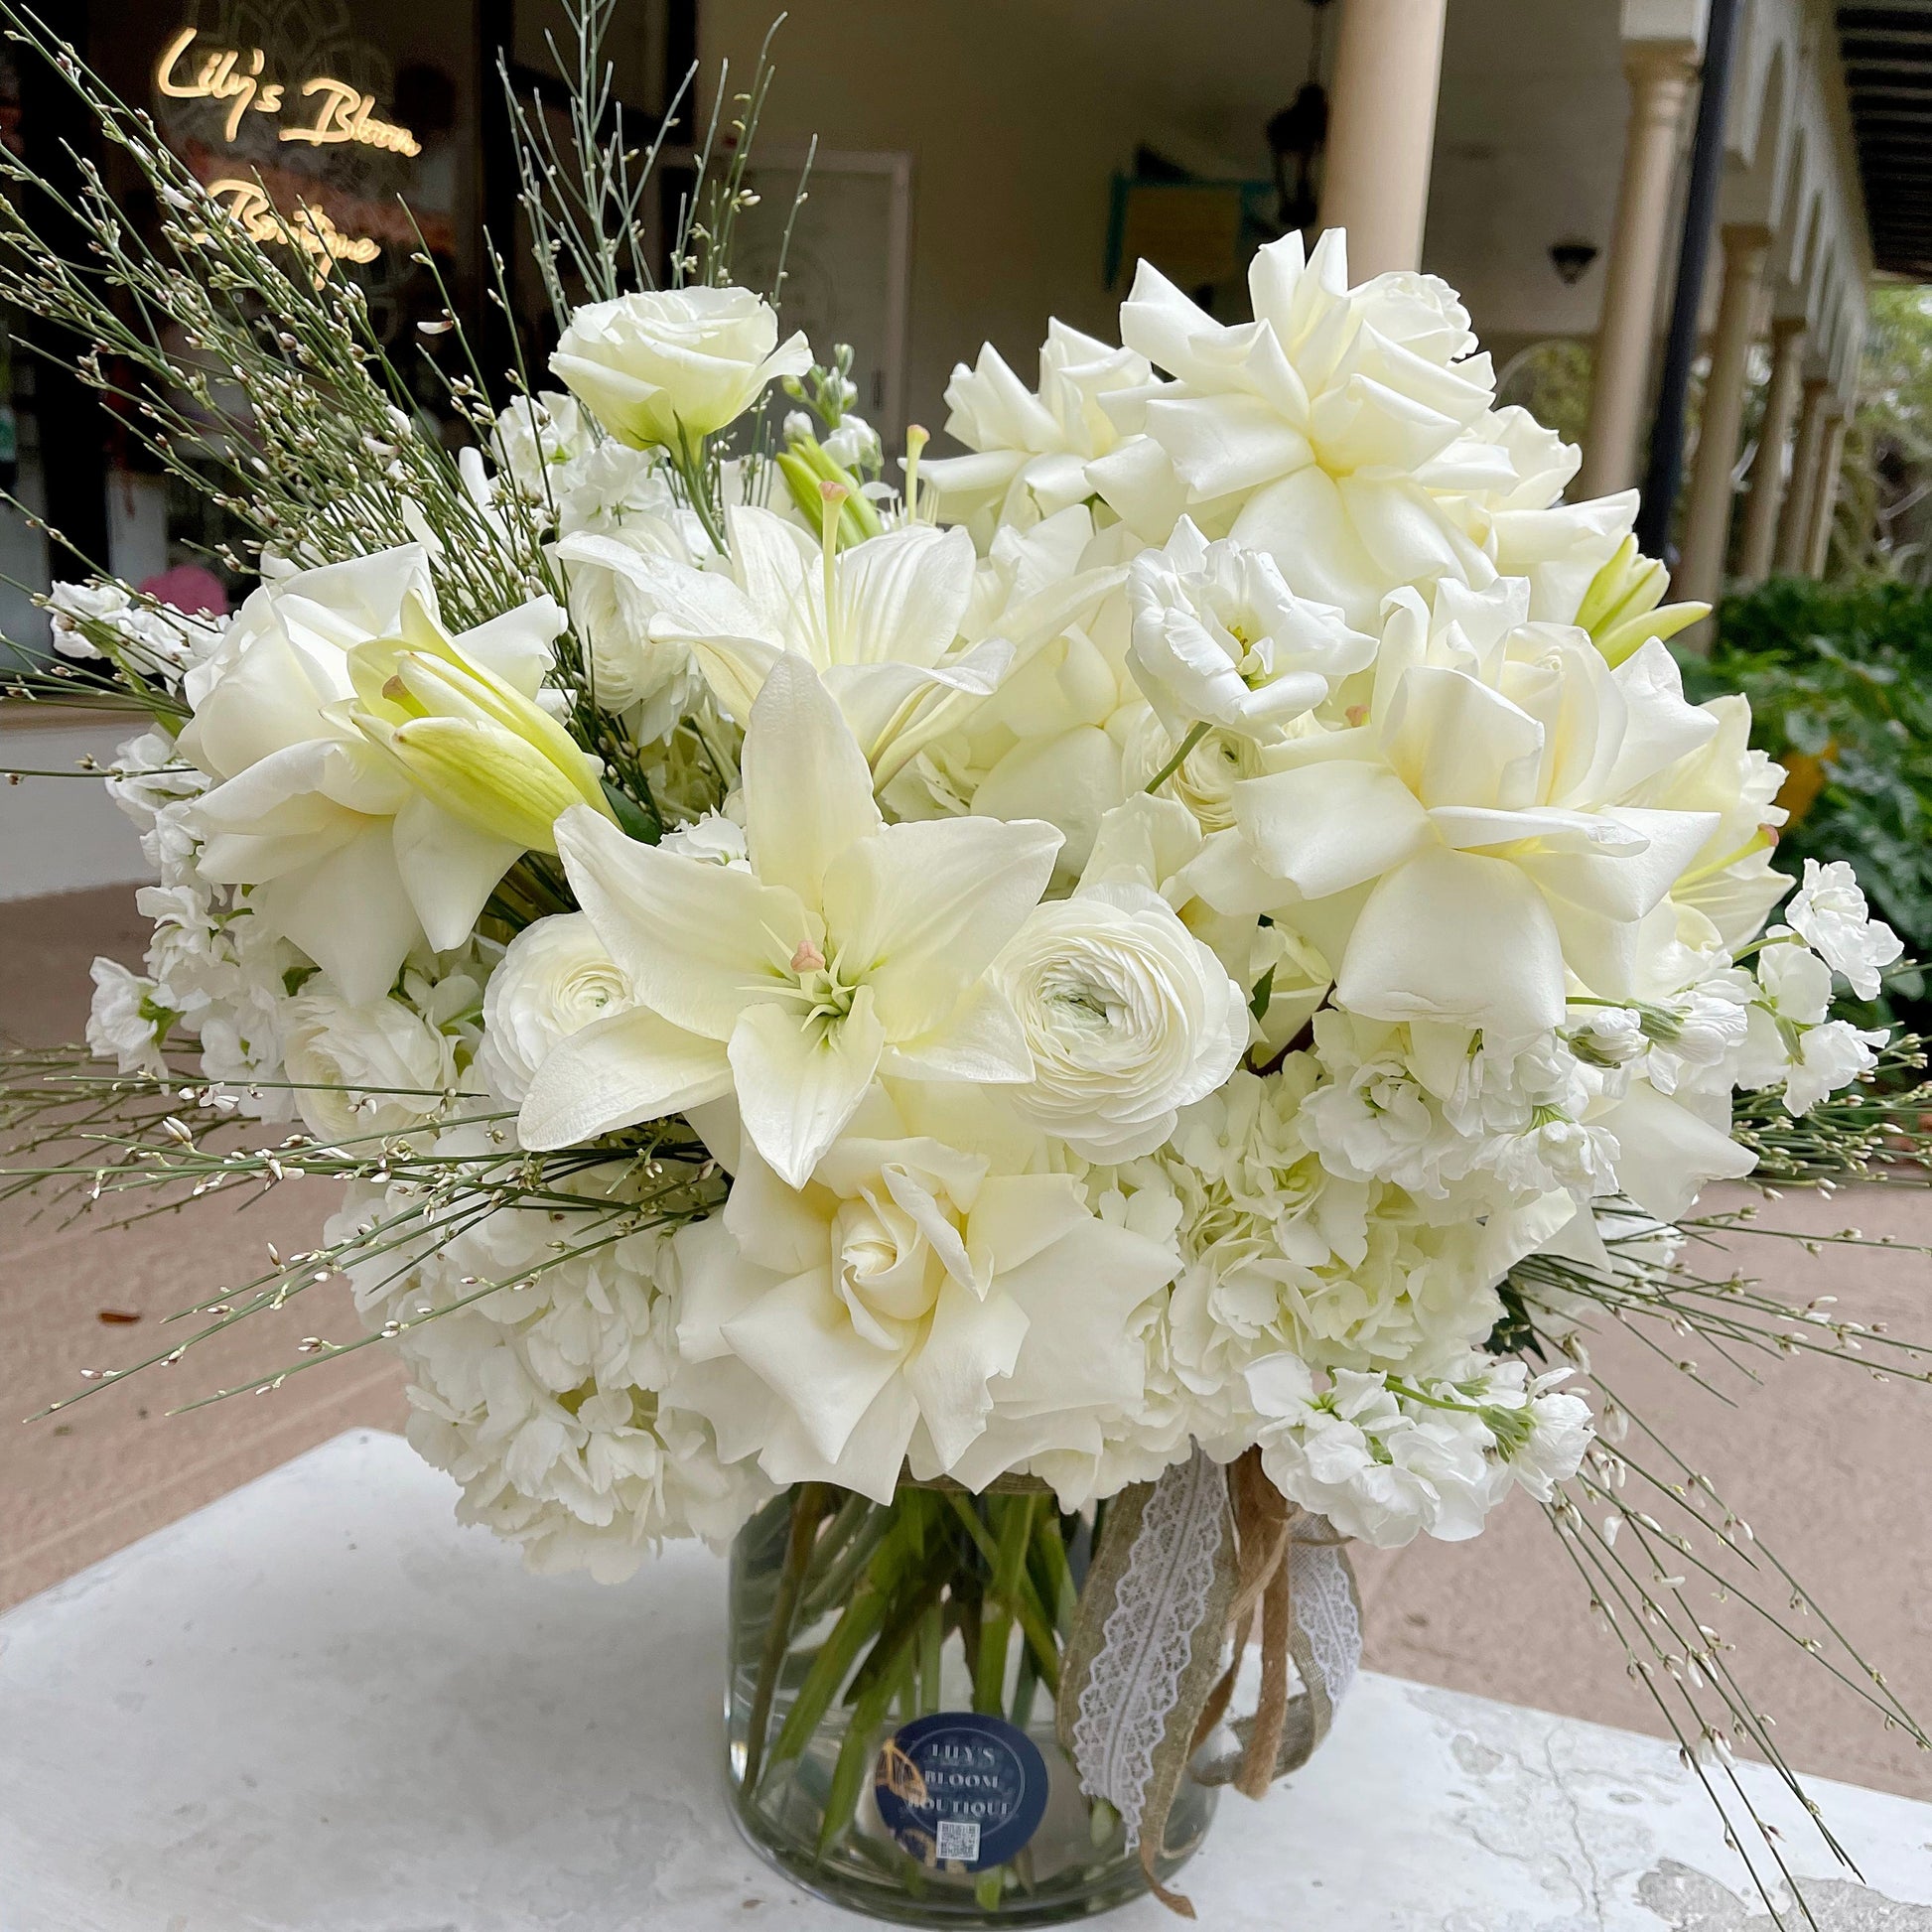 All white flower vase - Lily's Bloom Boutique